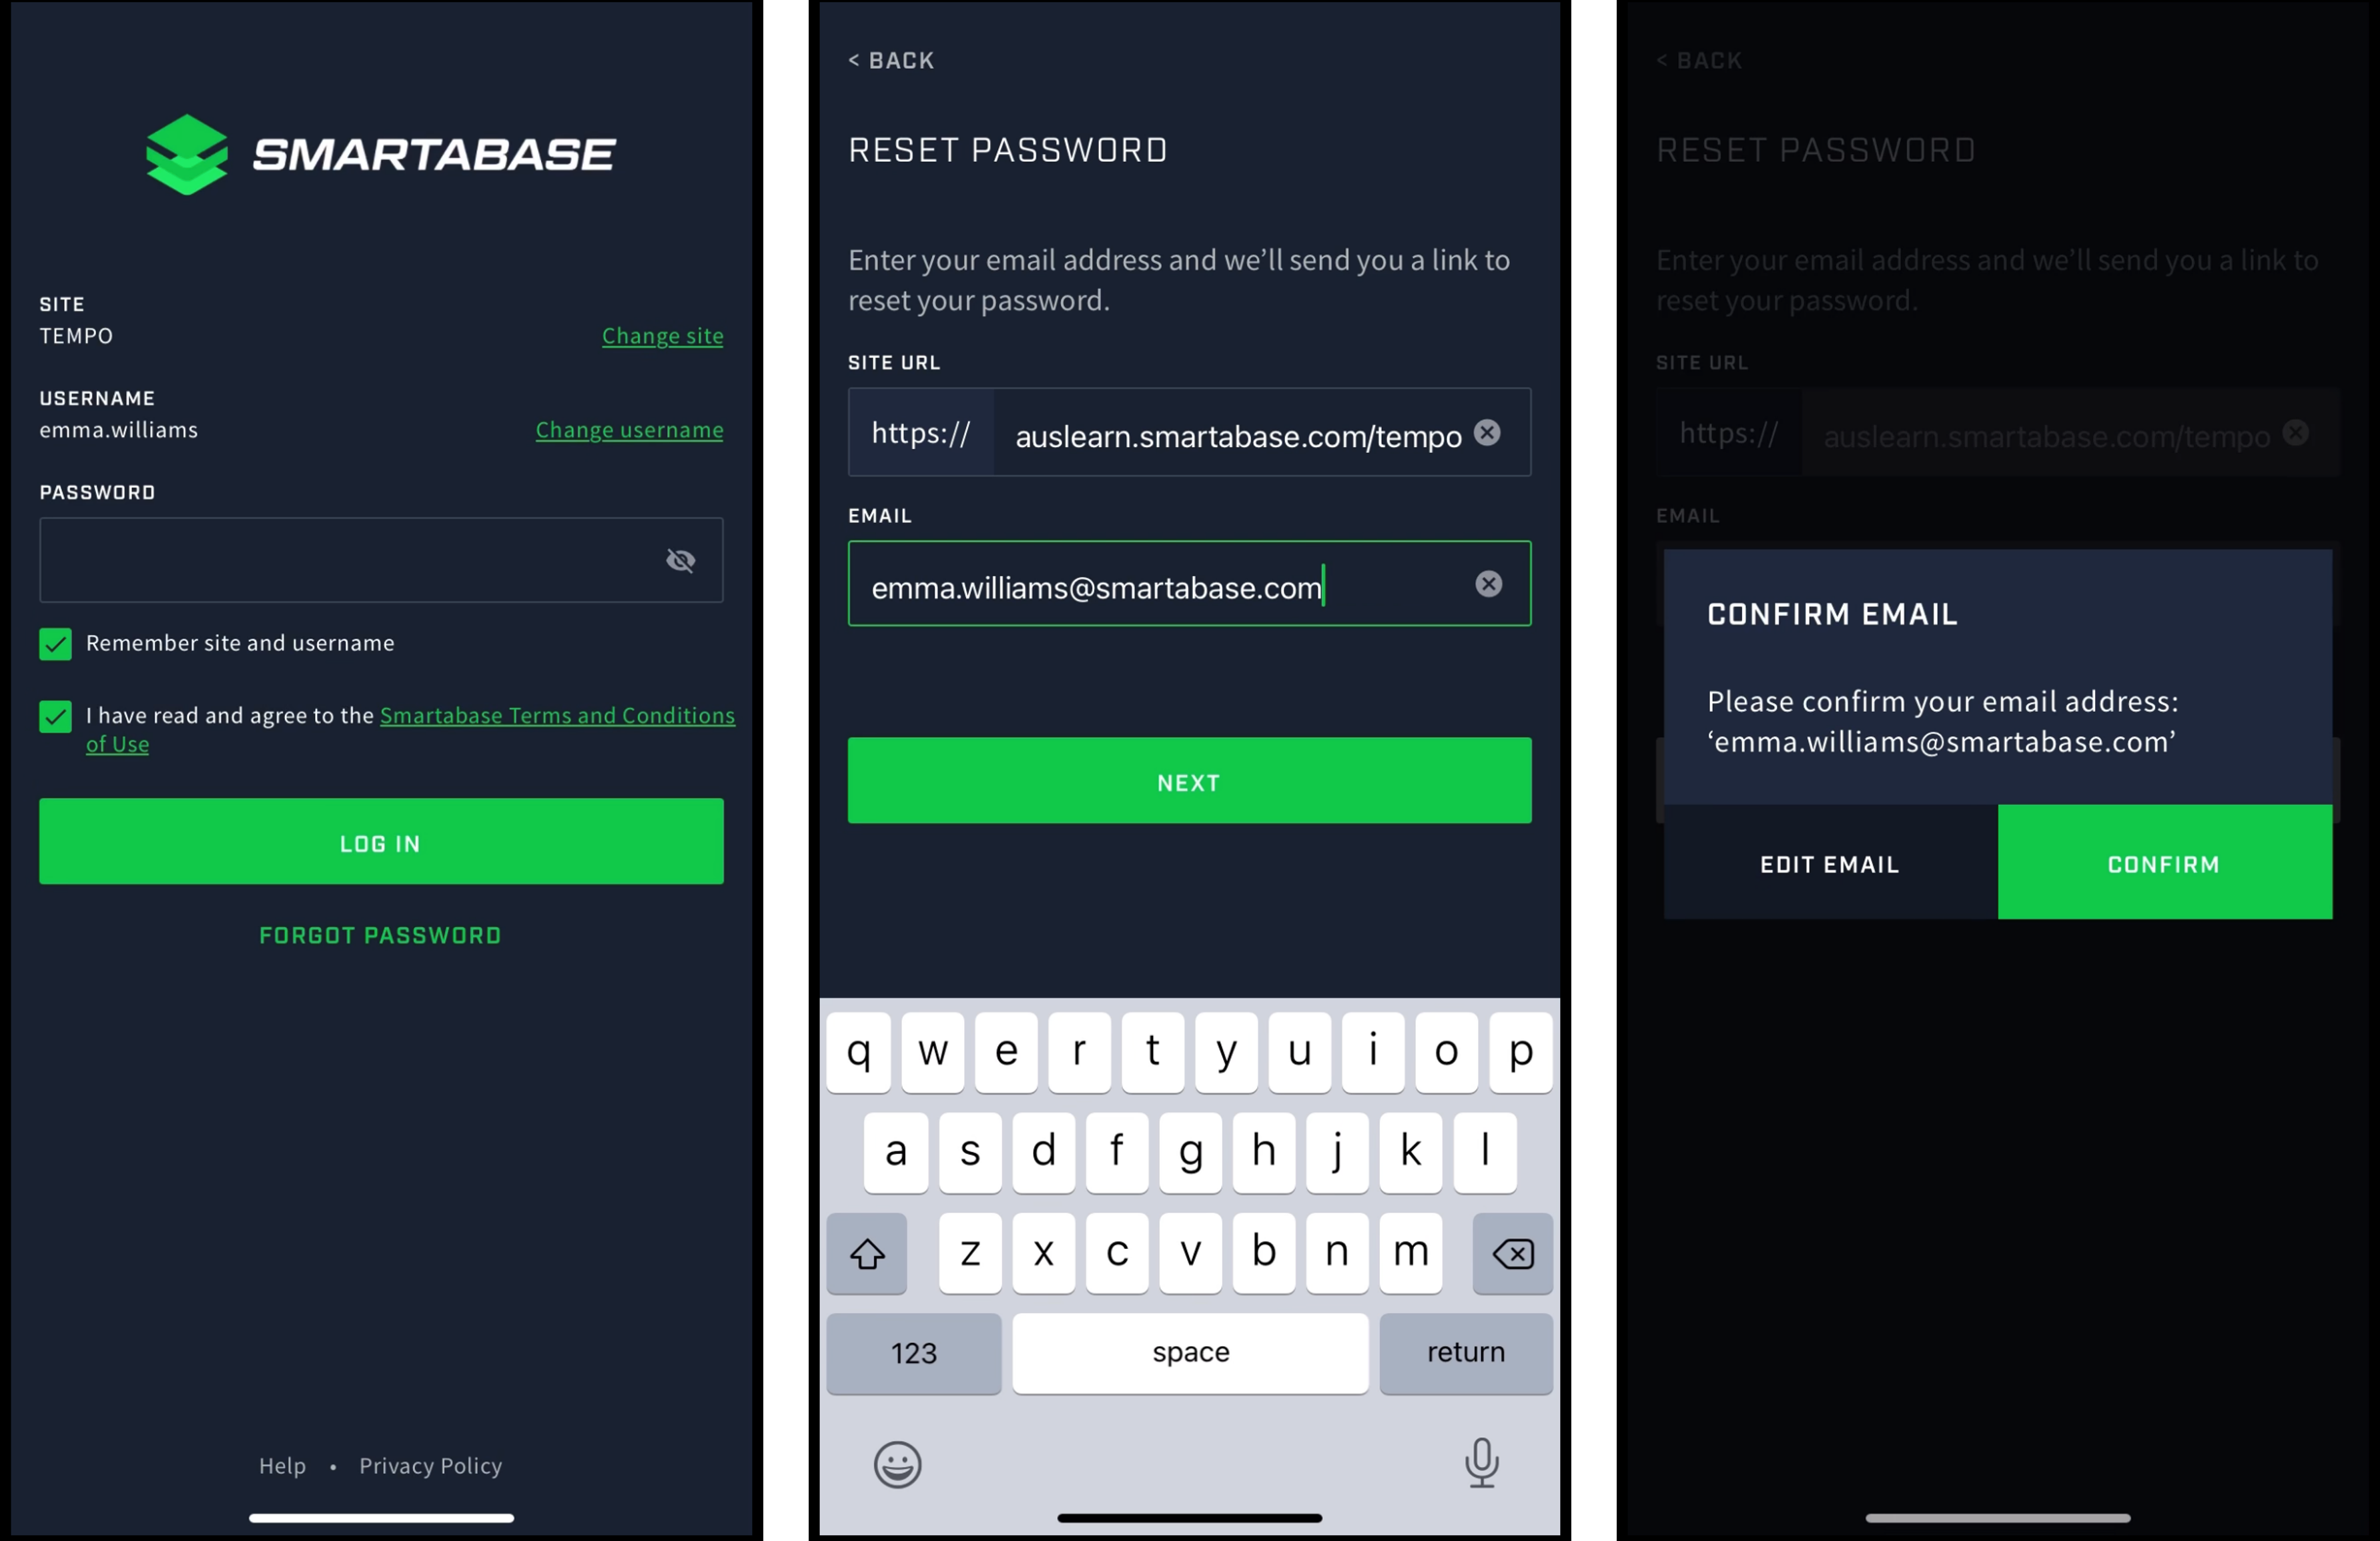 Three screenshots showing the steps to reset a password on the Smartabase Athlete app.